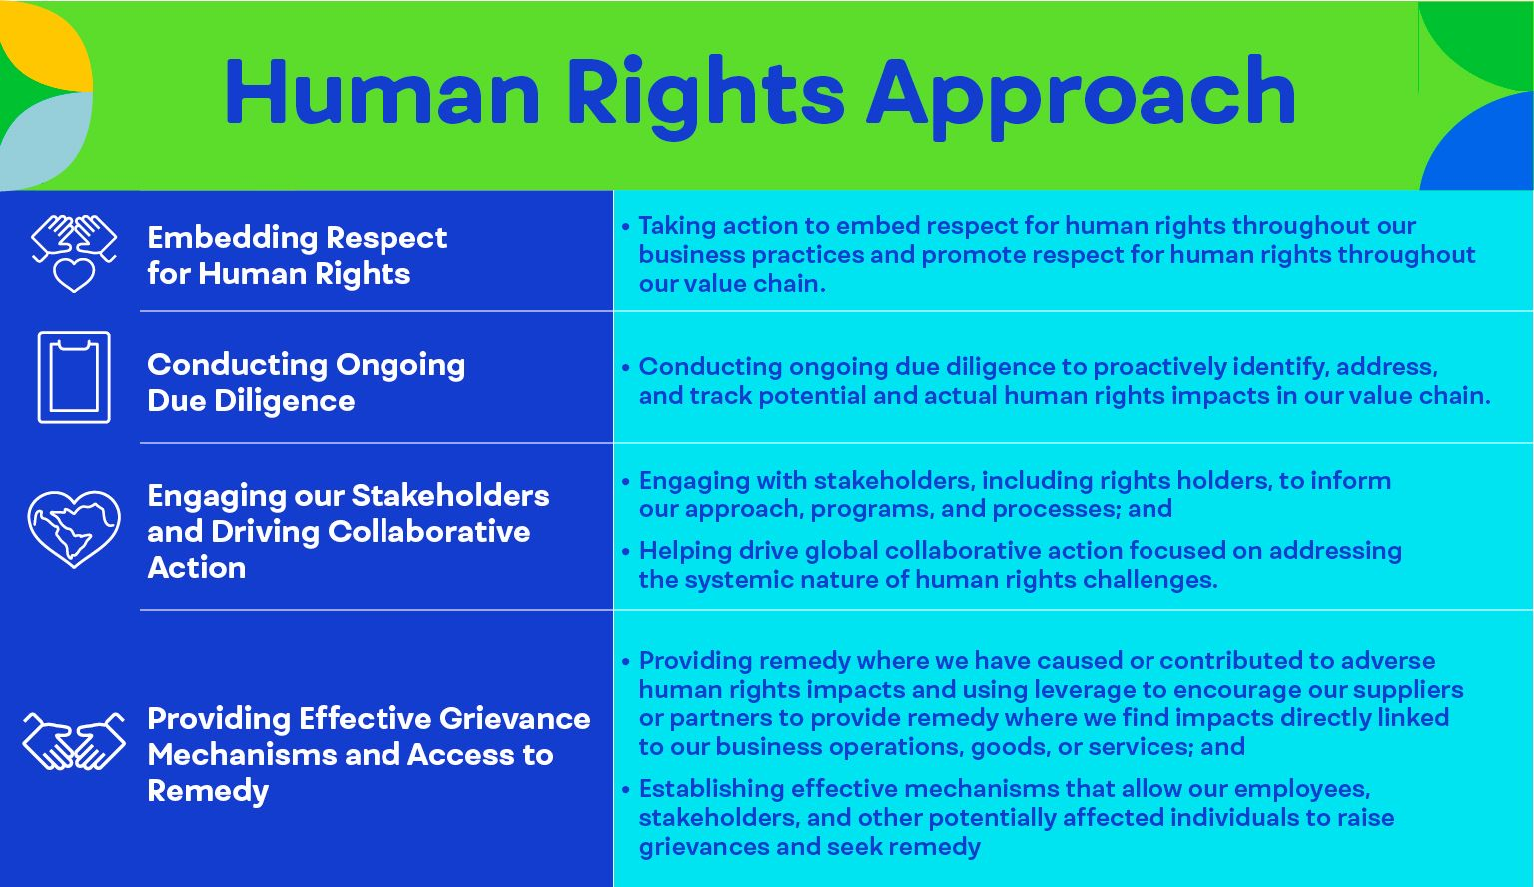 Human Rights Approach